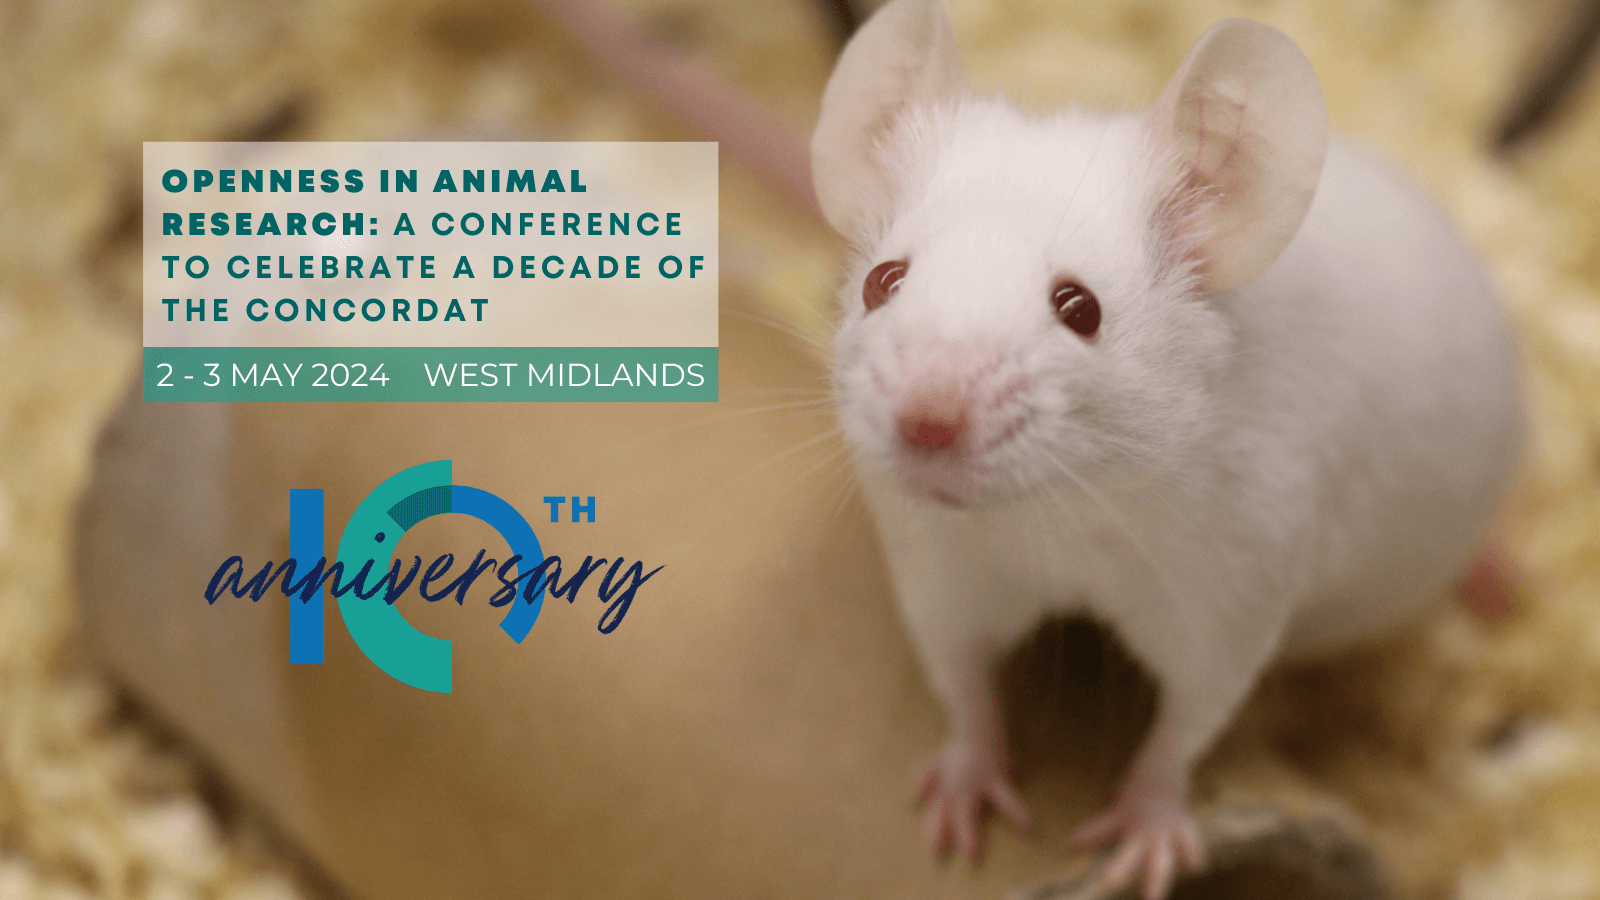 Openness in Animal Research: A Conference to Celebrate a Decade of the Concordat